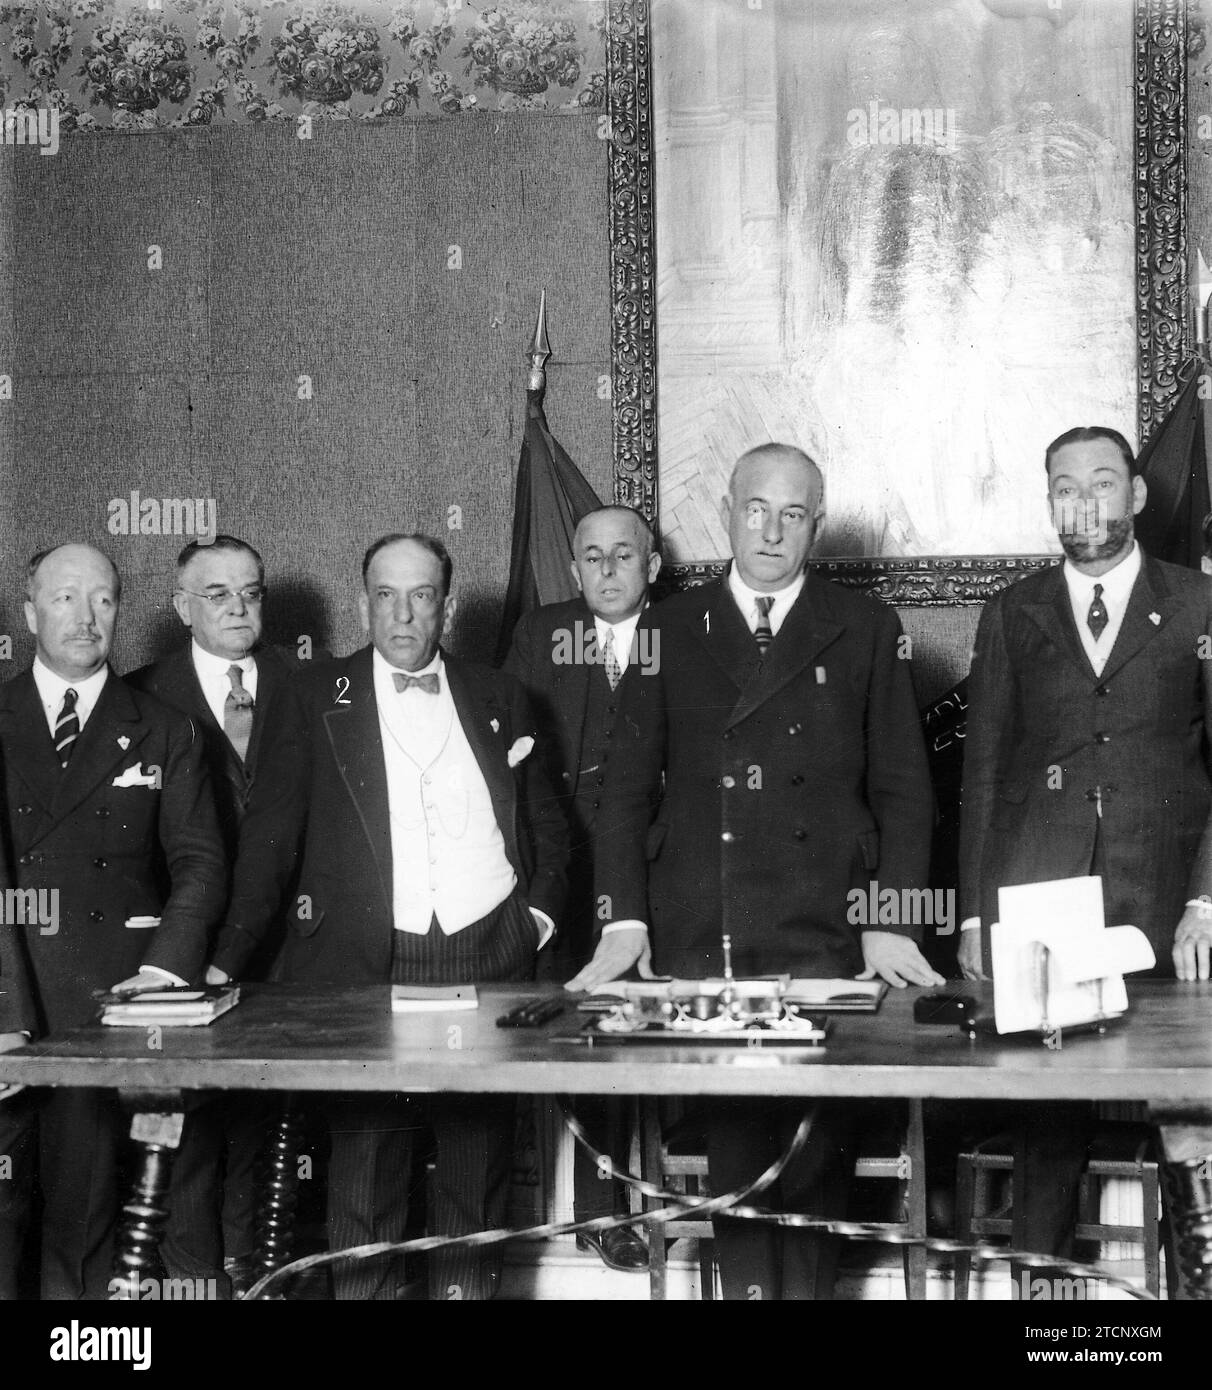 09/26/1926. Madrid. The national council of the Explorers of Spain. The president of the Council, General Primo de Rivera (1), with the President of the Institution, Mr. García Molinas (2) and the Members at the beginning of the important session held last night. Credit: Album / Archivo ABC / José Zegri Stock Photo